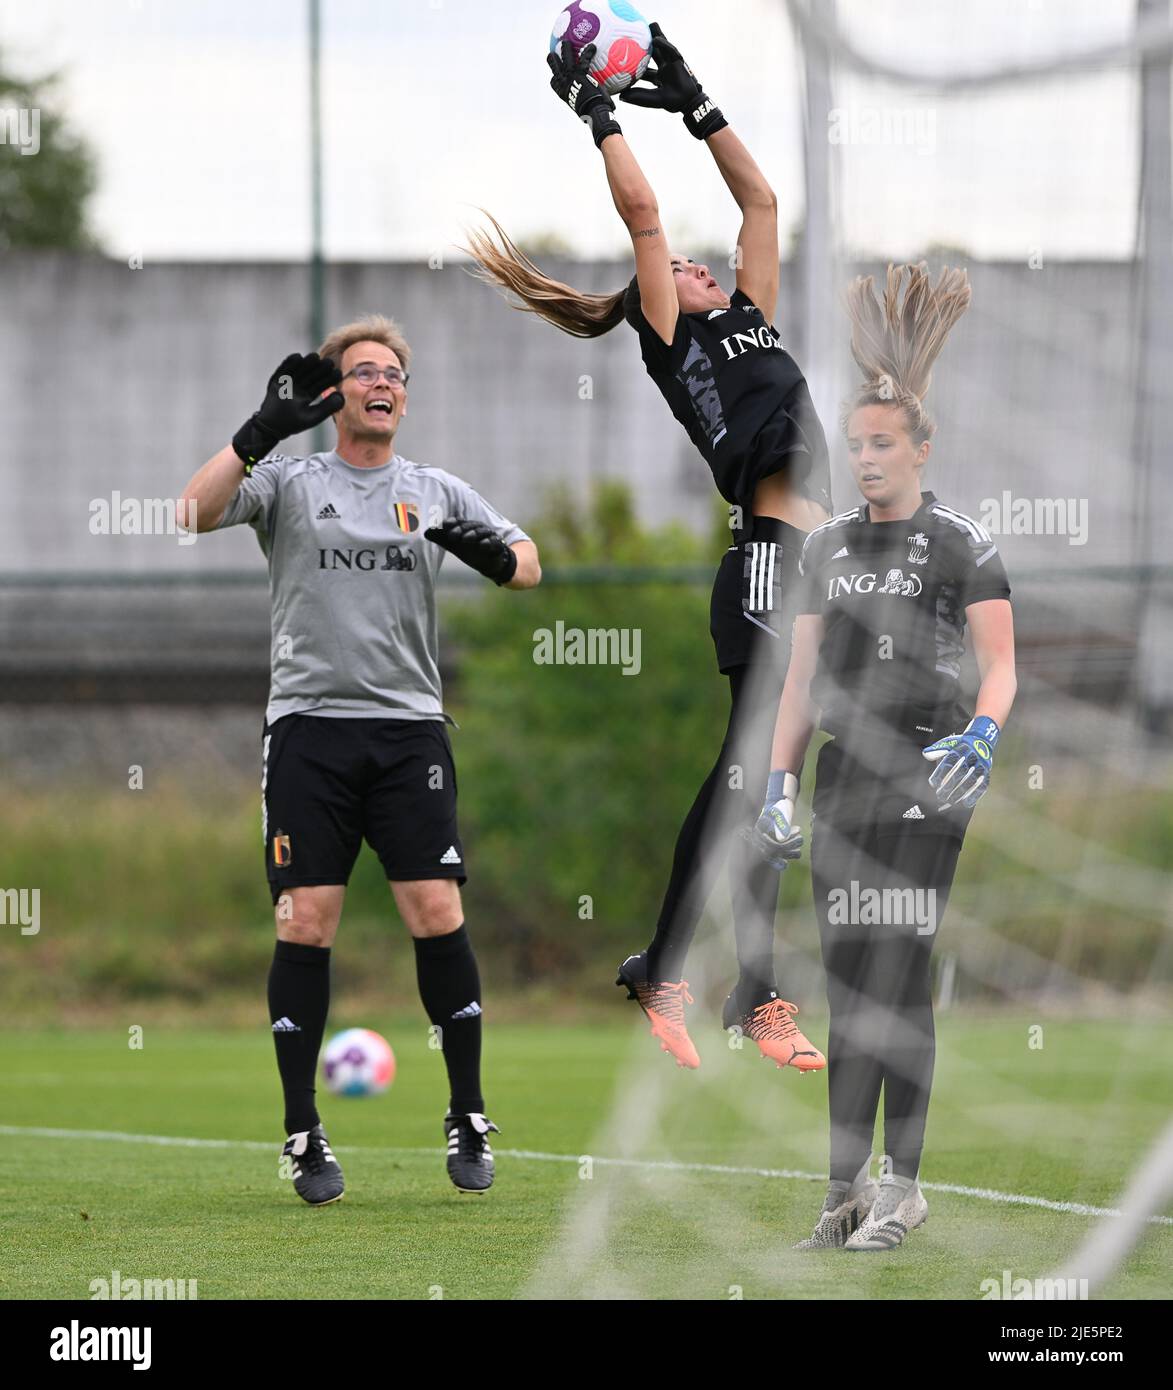 Belgium's goalkeeper coach Sven Cnudde and Belgium's goalkeeper Femke Bastiaen pictured in action during a training session of the Belgium's national women's soccer team the Red Flames, Saturday 25 June 2022 in Tubize. The Red Flames are preparing for the upcoming Women's Euro 2022 European Championships in England. BELGA PHOTO DAVID CATRY Stock Photo